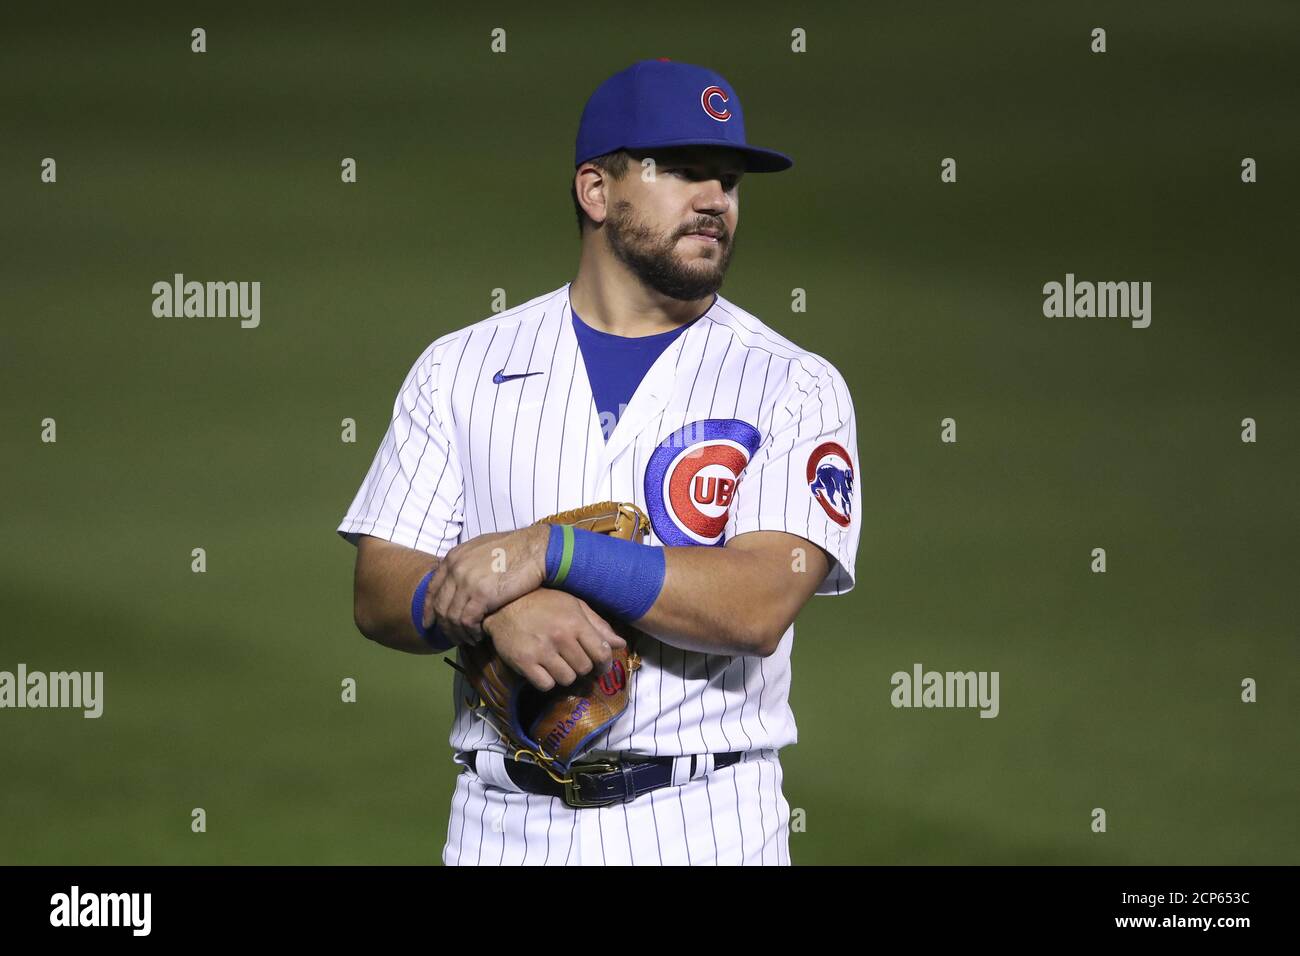 Kyle Schwarber Finding Groove With Triple-A Iowa Cubs – NBC Chicago